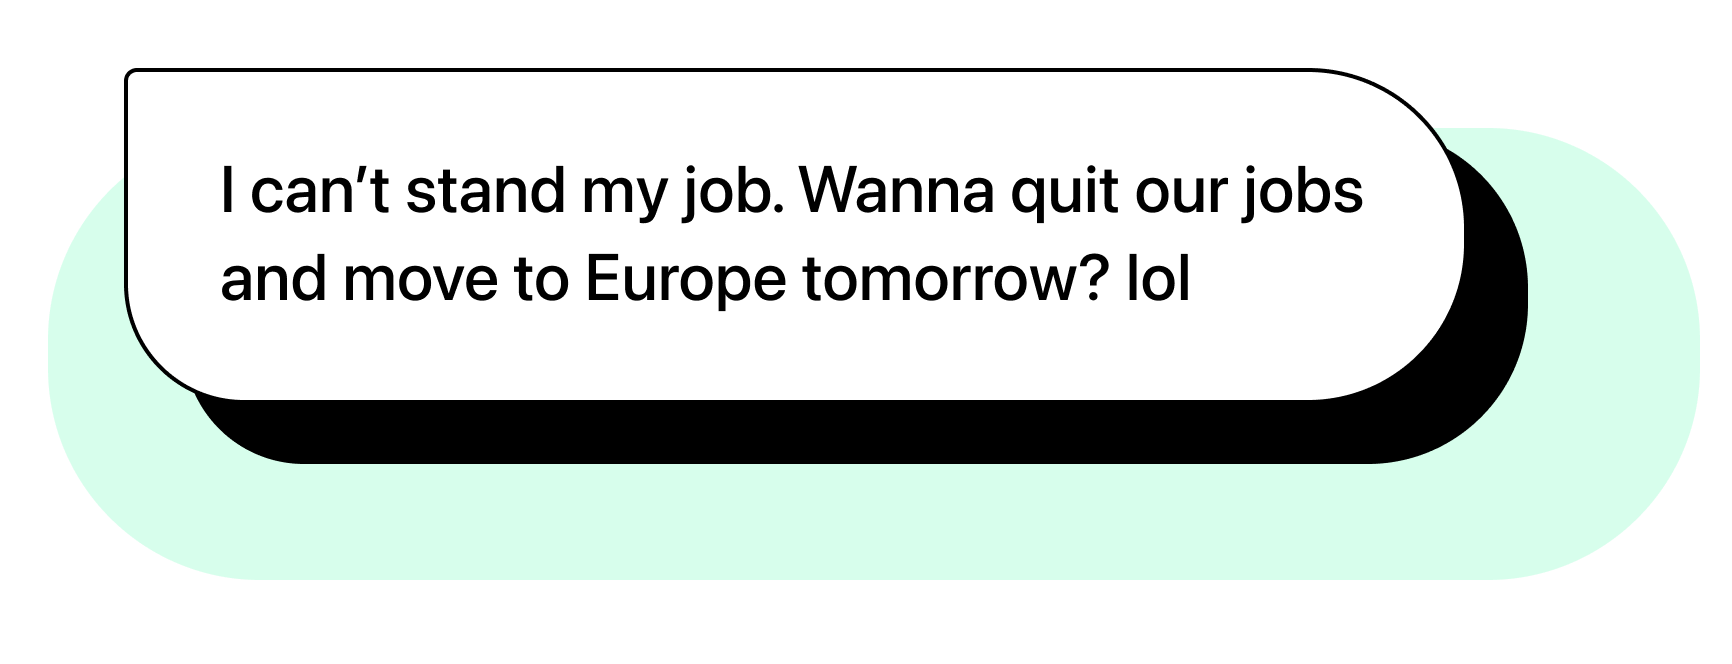 Chat bubble illustration with text "I can’t stand my job. Wanna quit our jobs and move to Europe tomorrow? lol"